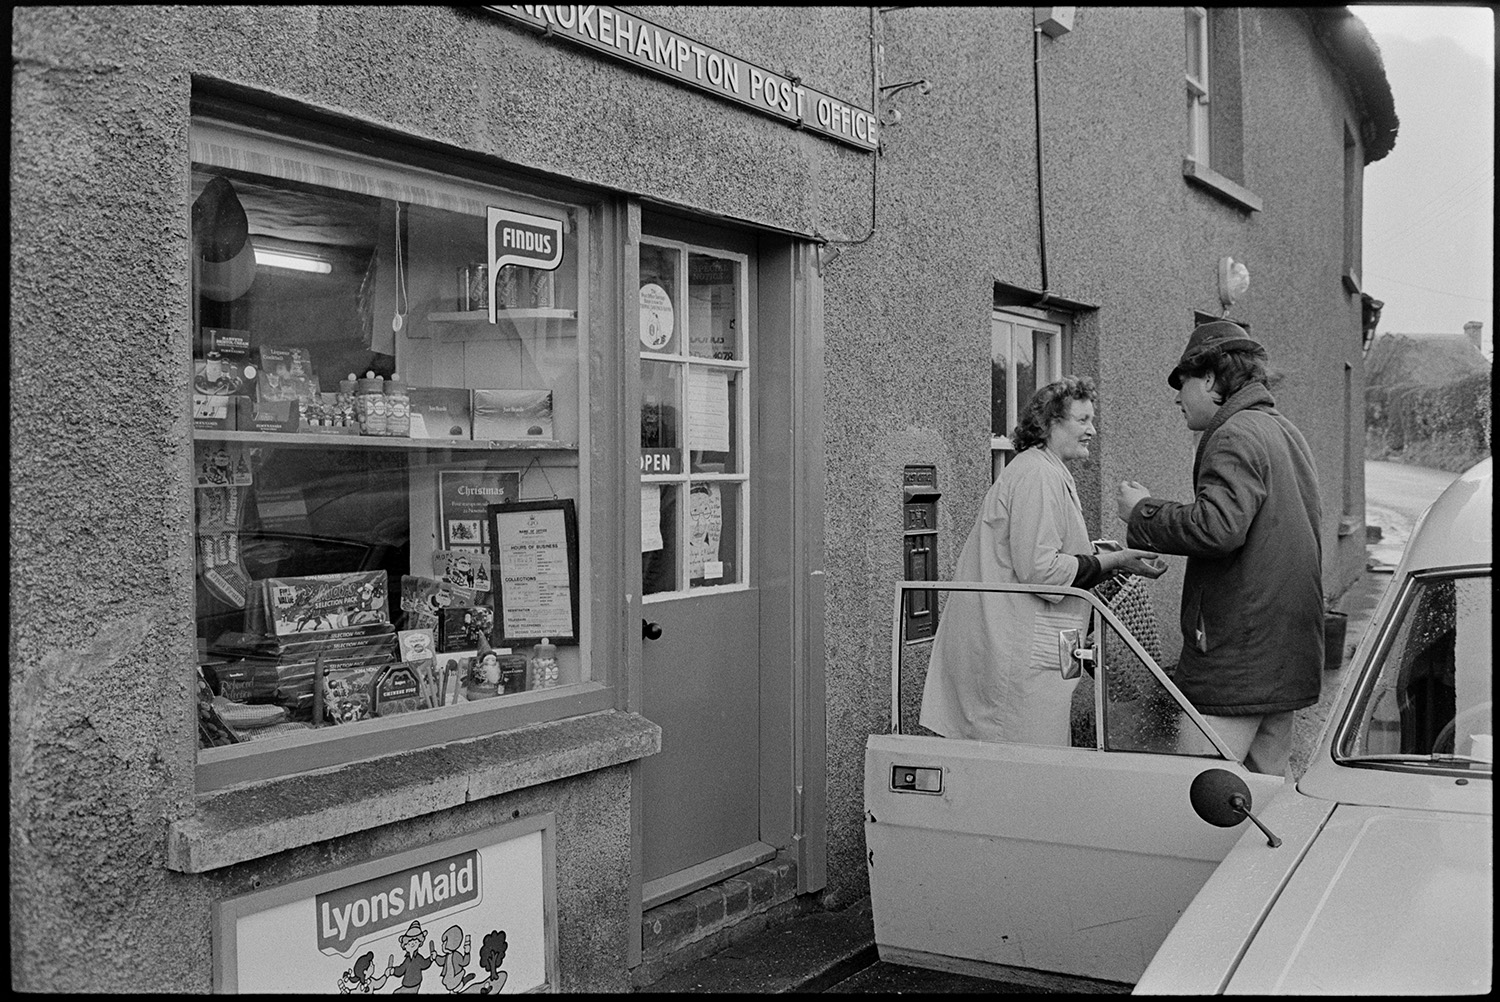 Baker delivering bread round village and outside Post Office from van. 
[A woman buying something from an A Guy & Sons Ltd of Exbourne baker's van outside Monkokehampton Post Office. Jars of sweets and boxes of chocolate can be seen in the Post Office window.]